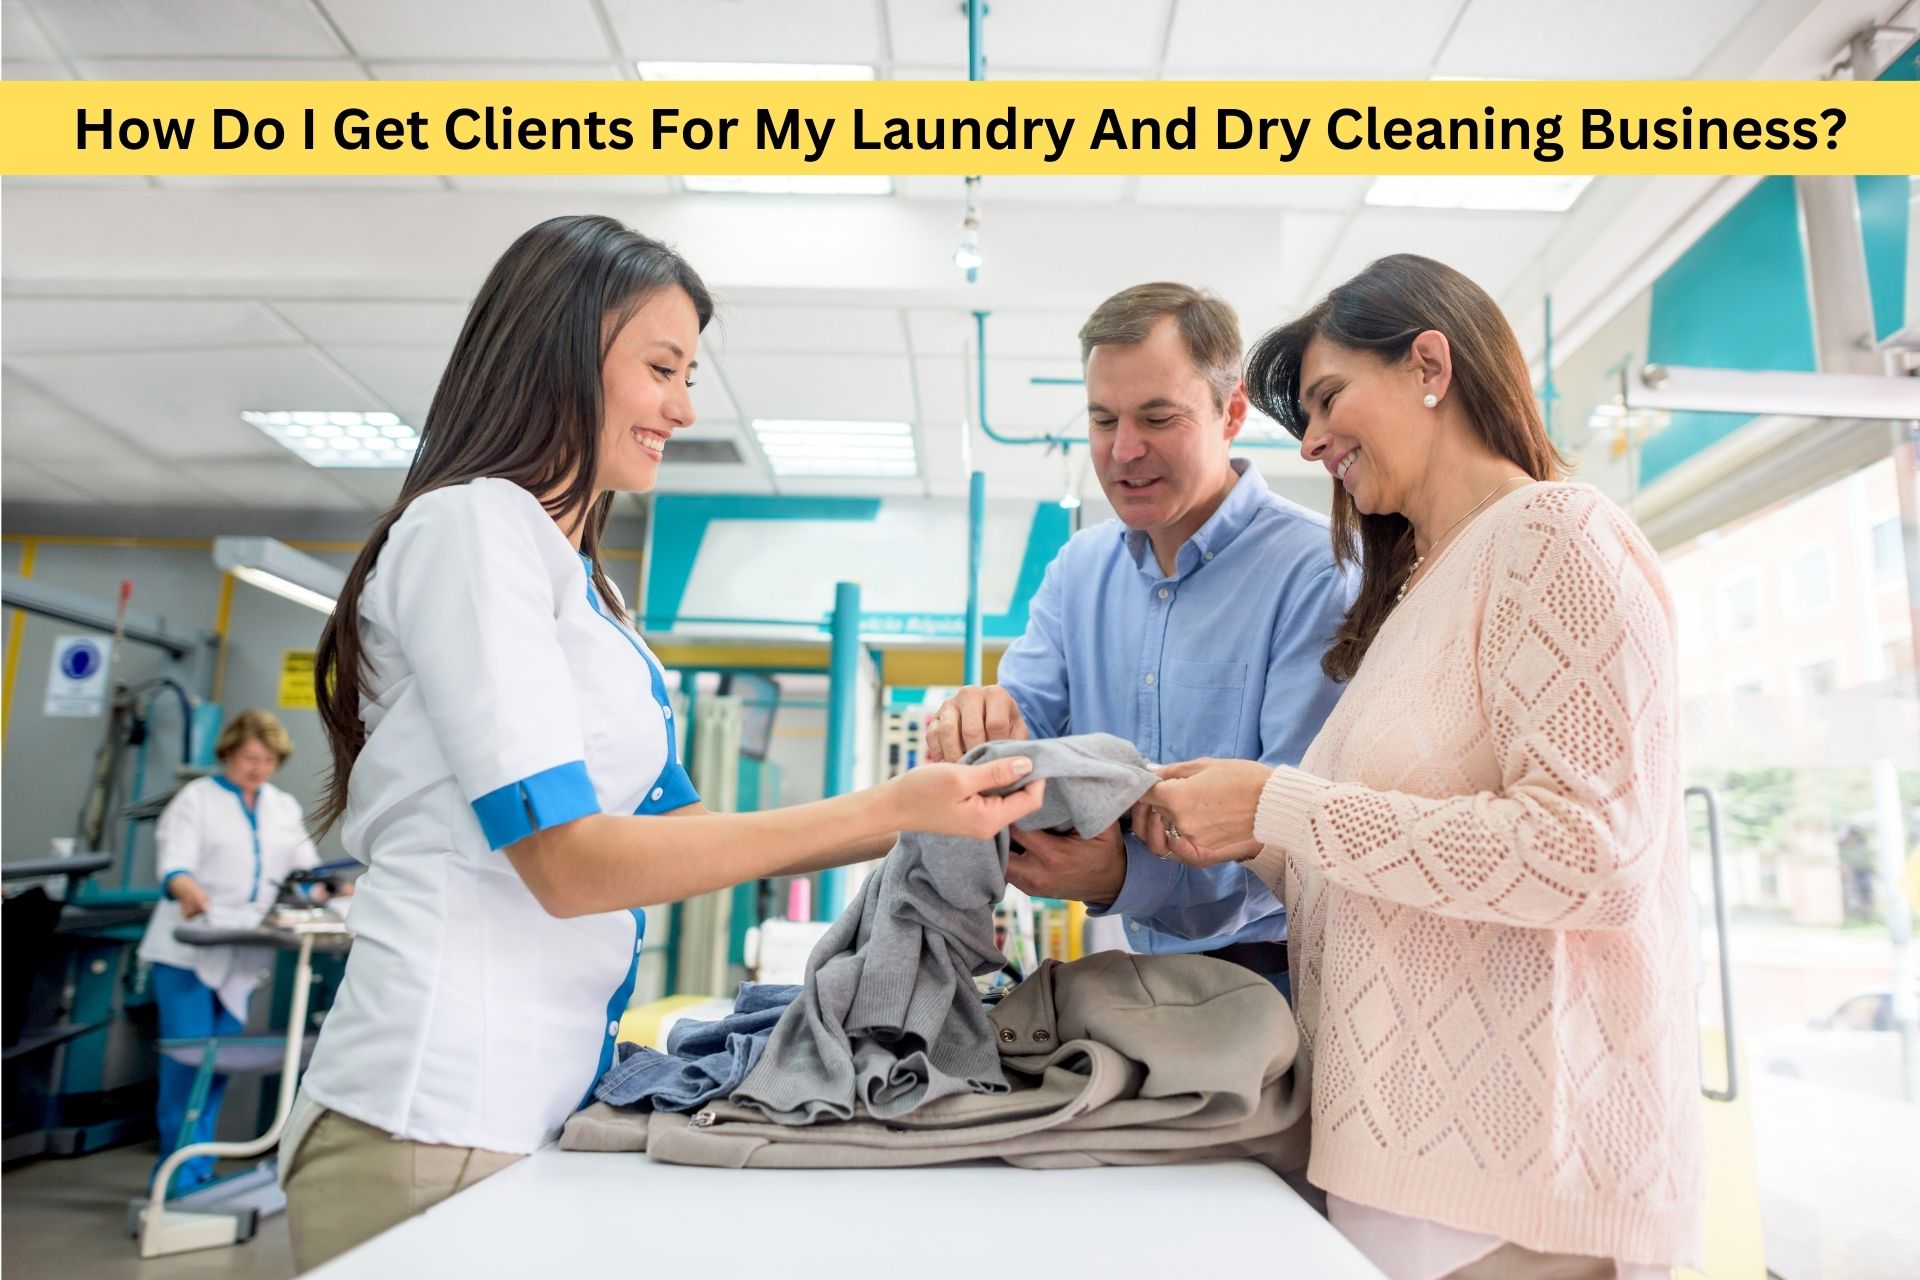 How Do I Get Clients For My Laundry And Dry Cleaning Business?